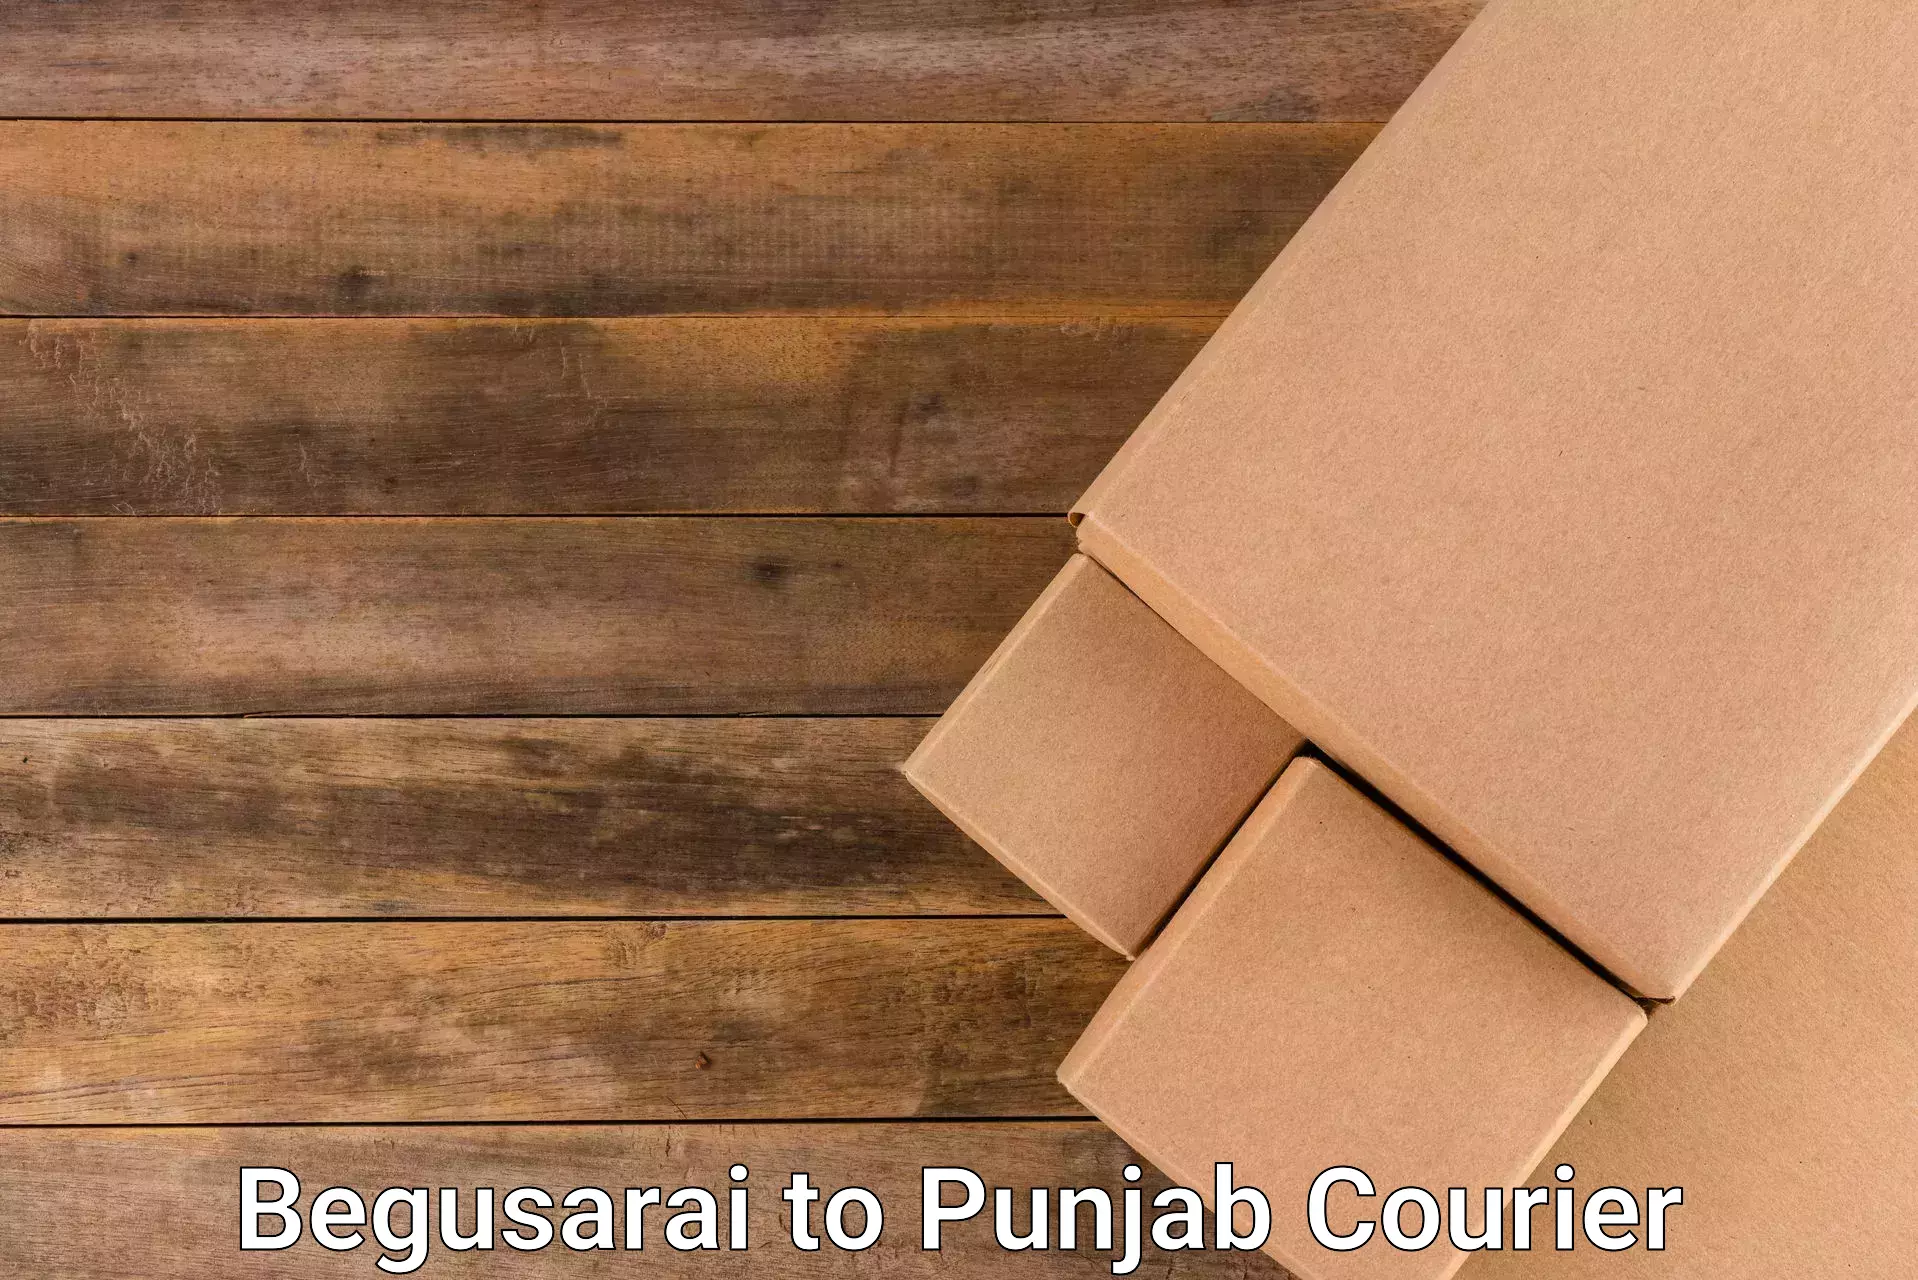 Sustainable courier practices Begusarai to Punjab Agricultural University Ludhiana